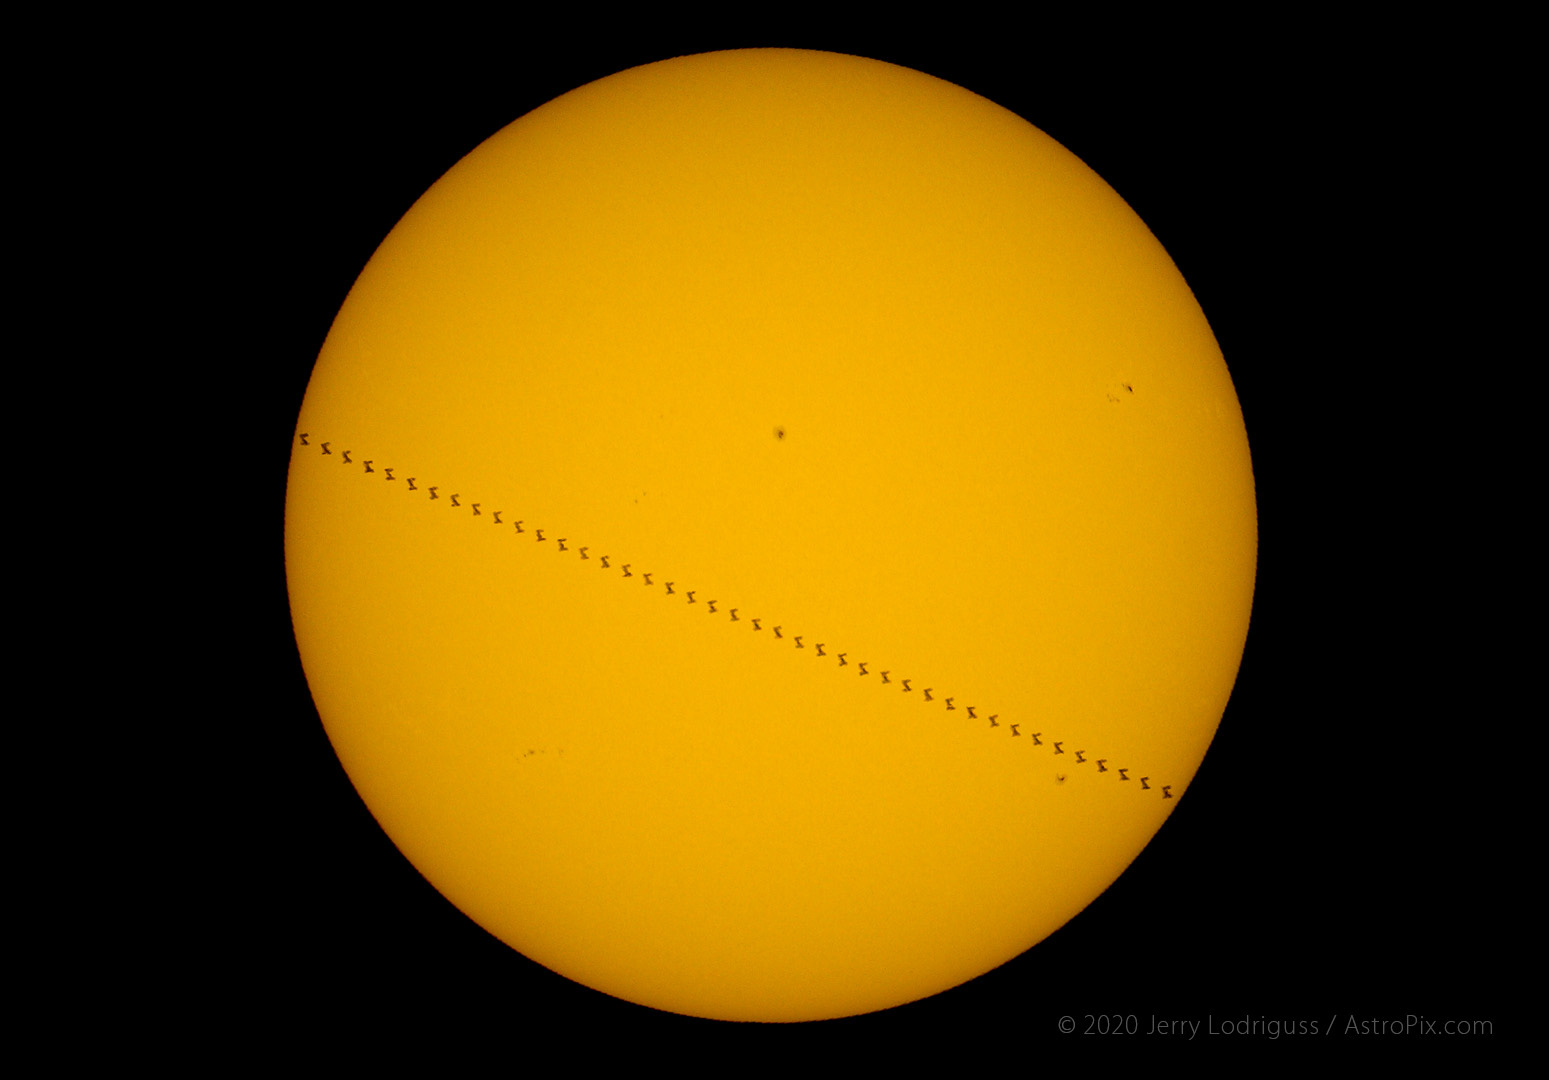 The International Space Station with the Space Shuttle Atlantis docked transit across the face of the Sun on July 17, 2011 at 8:09:20.10 a.m. EDT.  Transit-Duration: 1.42s, path width: 9.48km, Diameter of ISS: 33.80 arc seconds. Observed from Philadelphia, PA, USA at Longitude: -75d00m08.4s  Latitude: +40d07m34.8s.